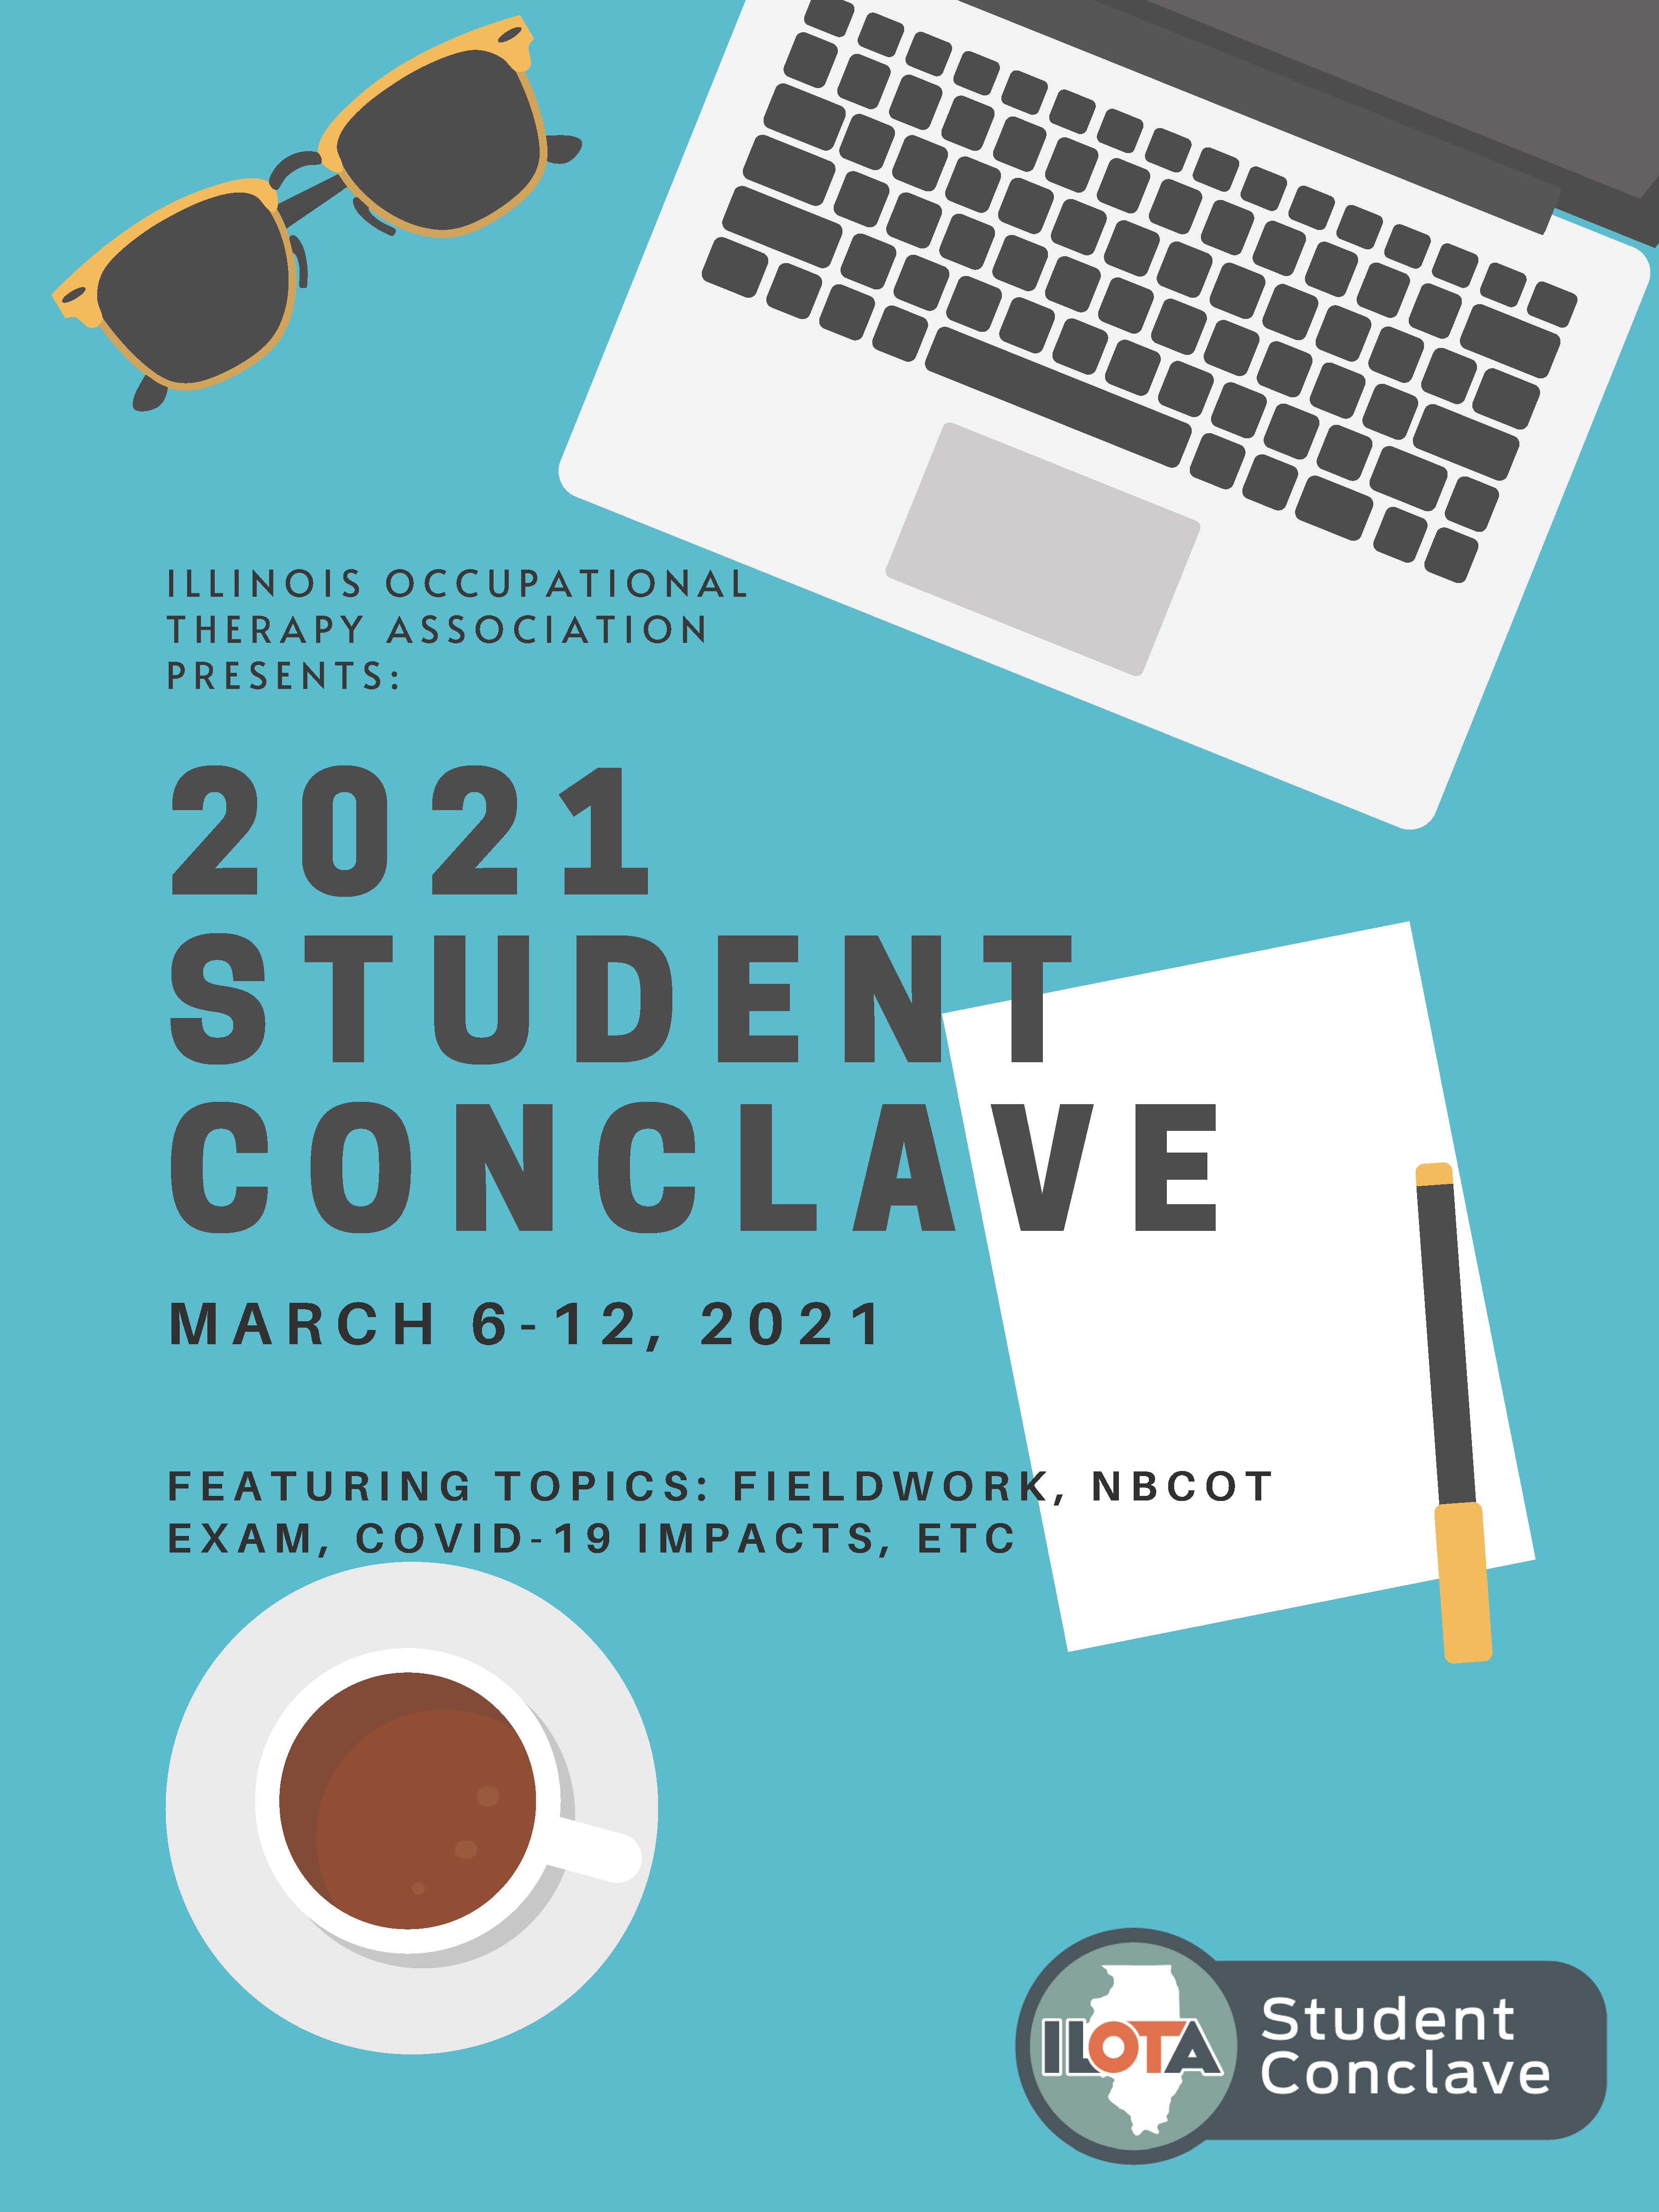 Flyer for the Student Conclave